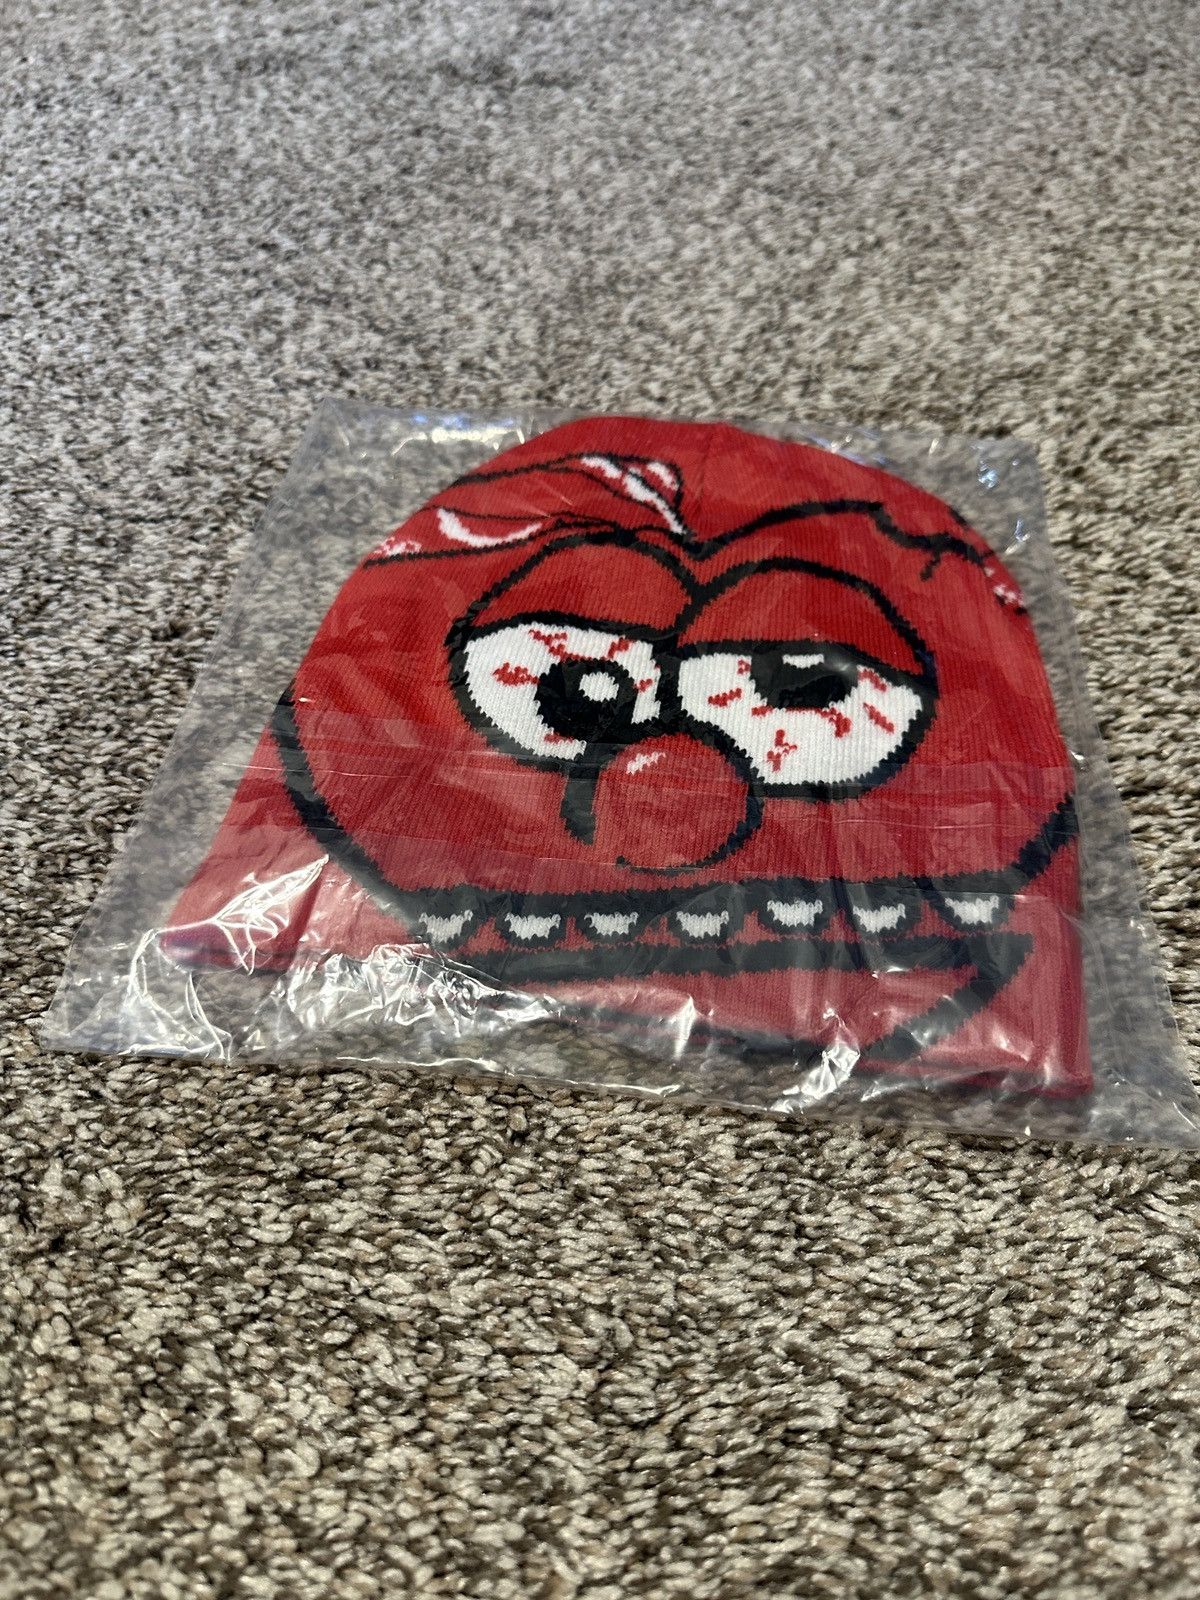 Glo Gang Glo Gang Chief Keef Thot Breaker Heart Beanie Red | Grailed